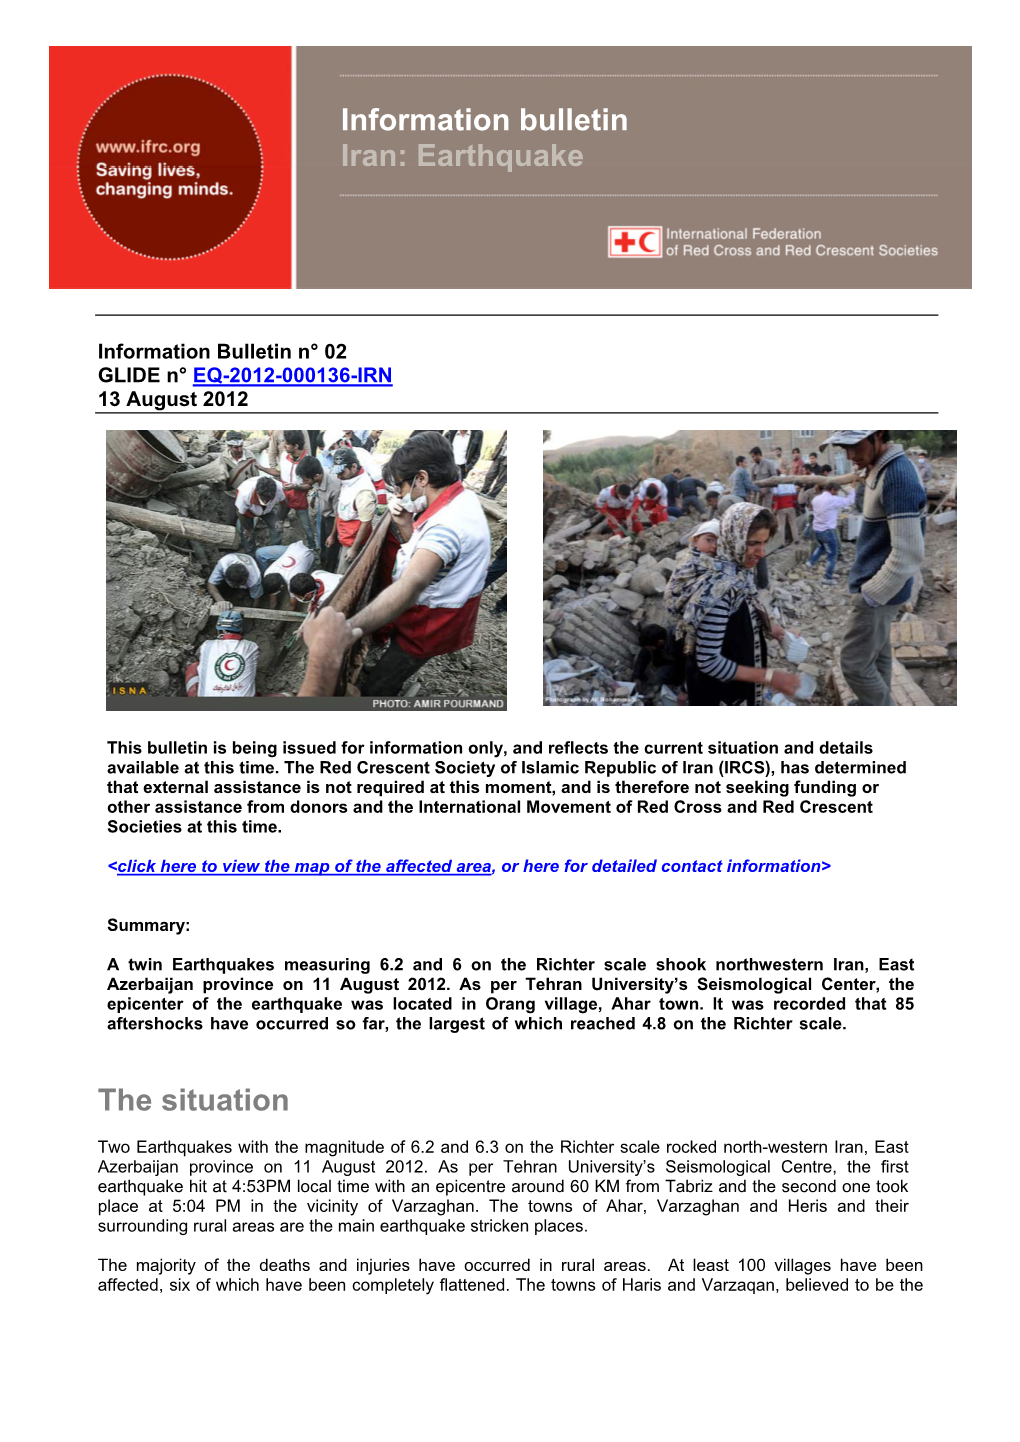 The Situation Information Bulletin Iran: Earthquake